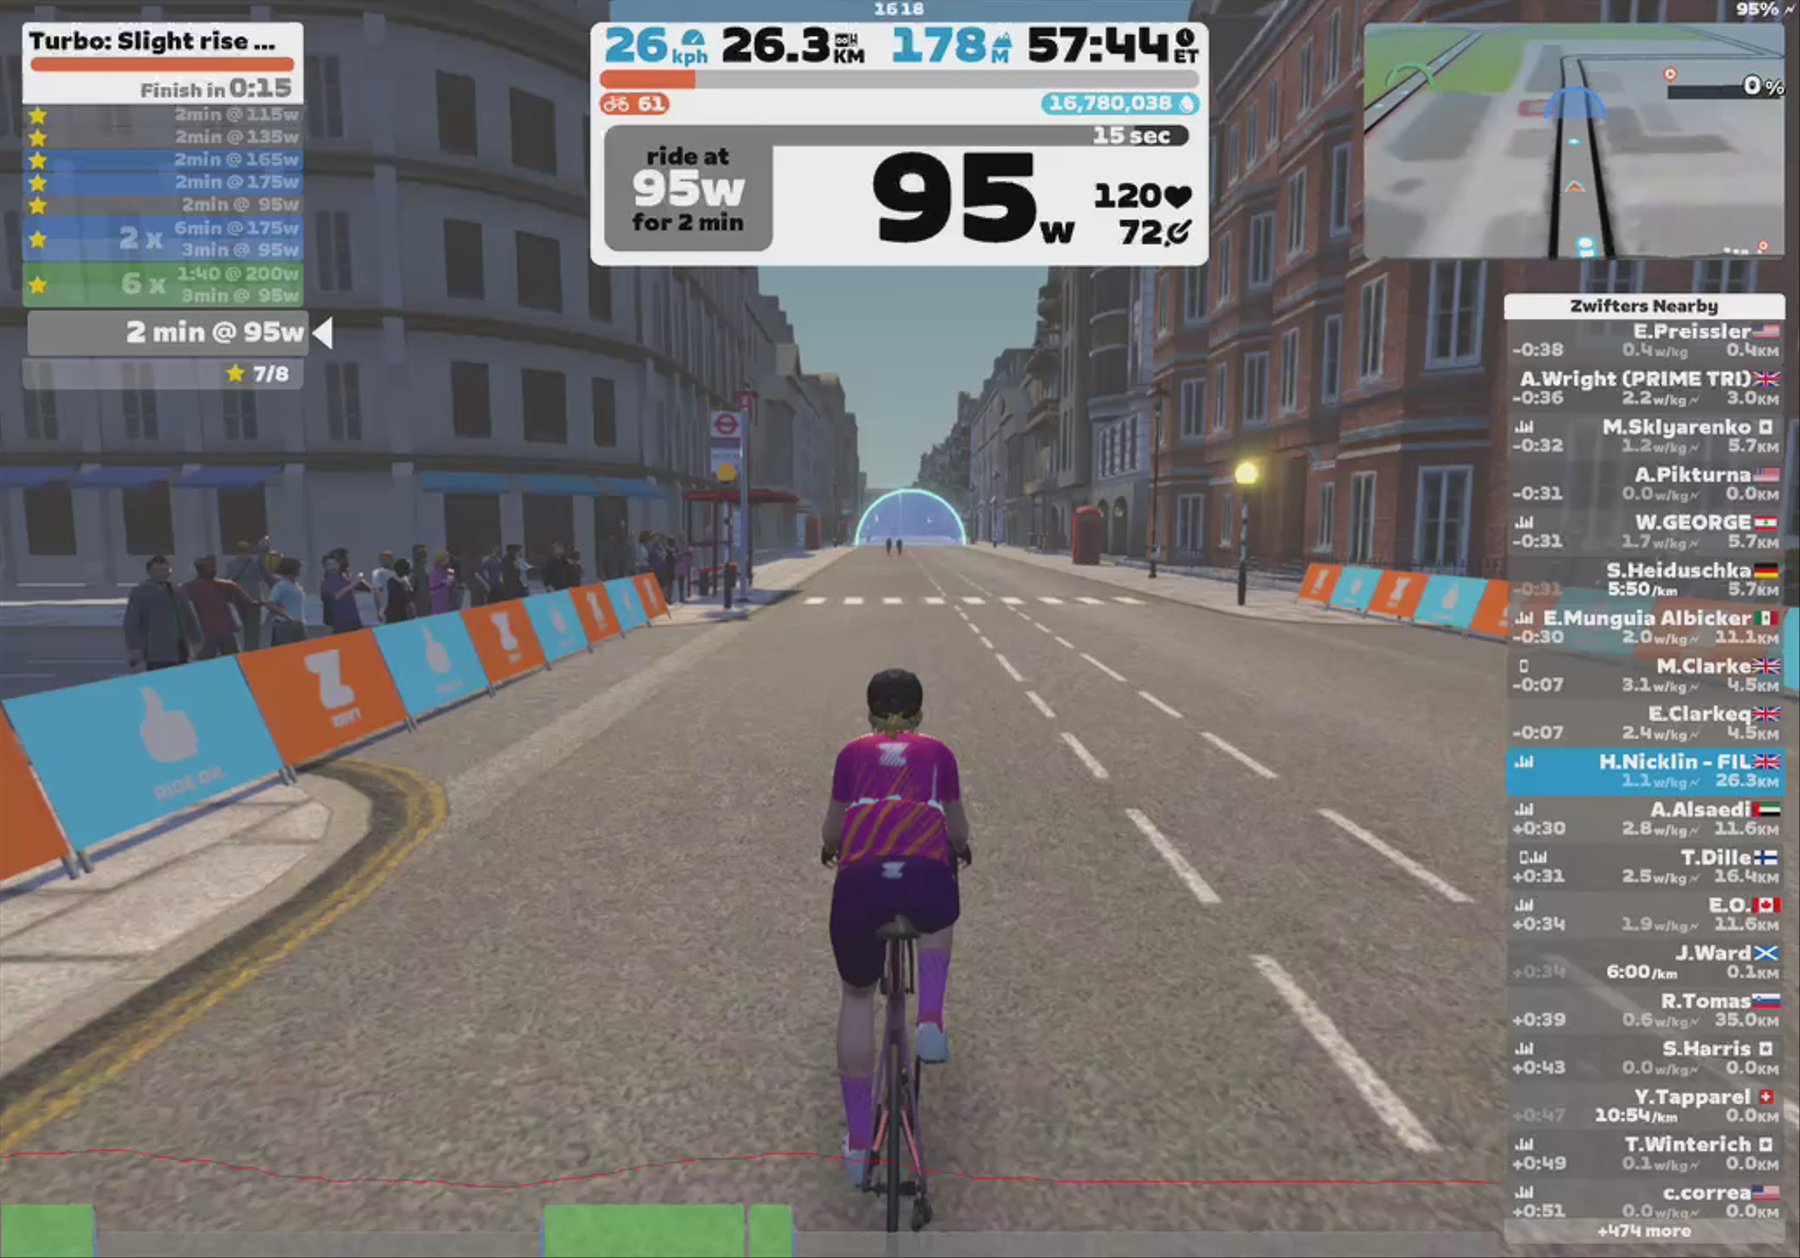 Zwift - Turbo: Slight rise to check the knee out in London